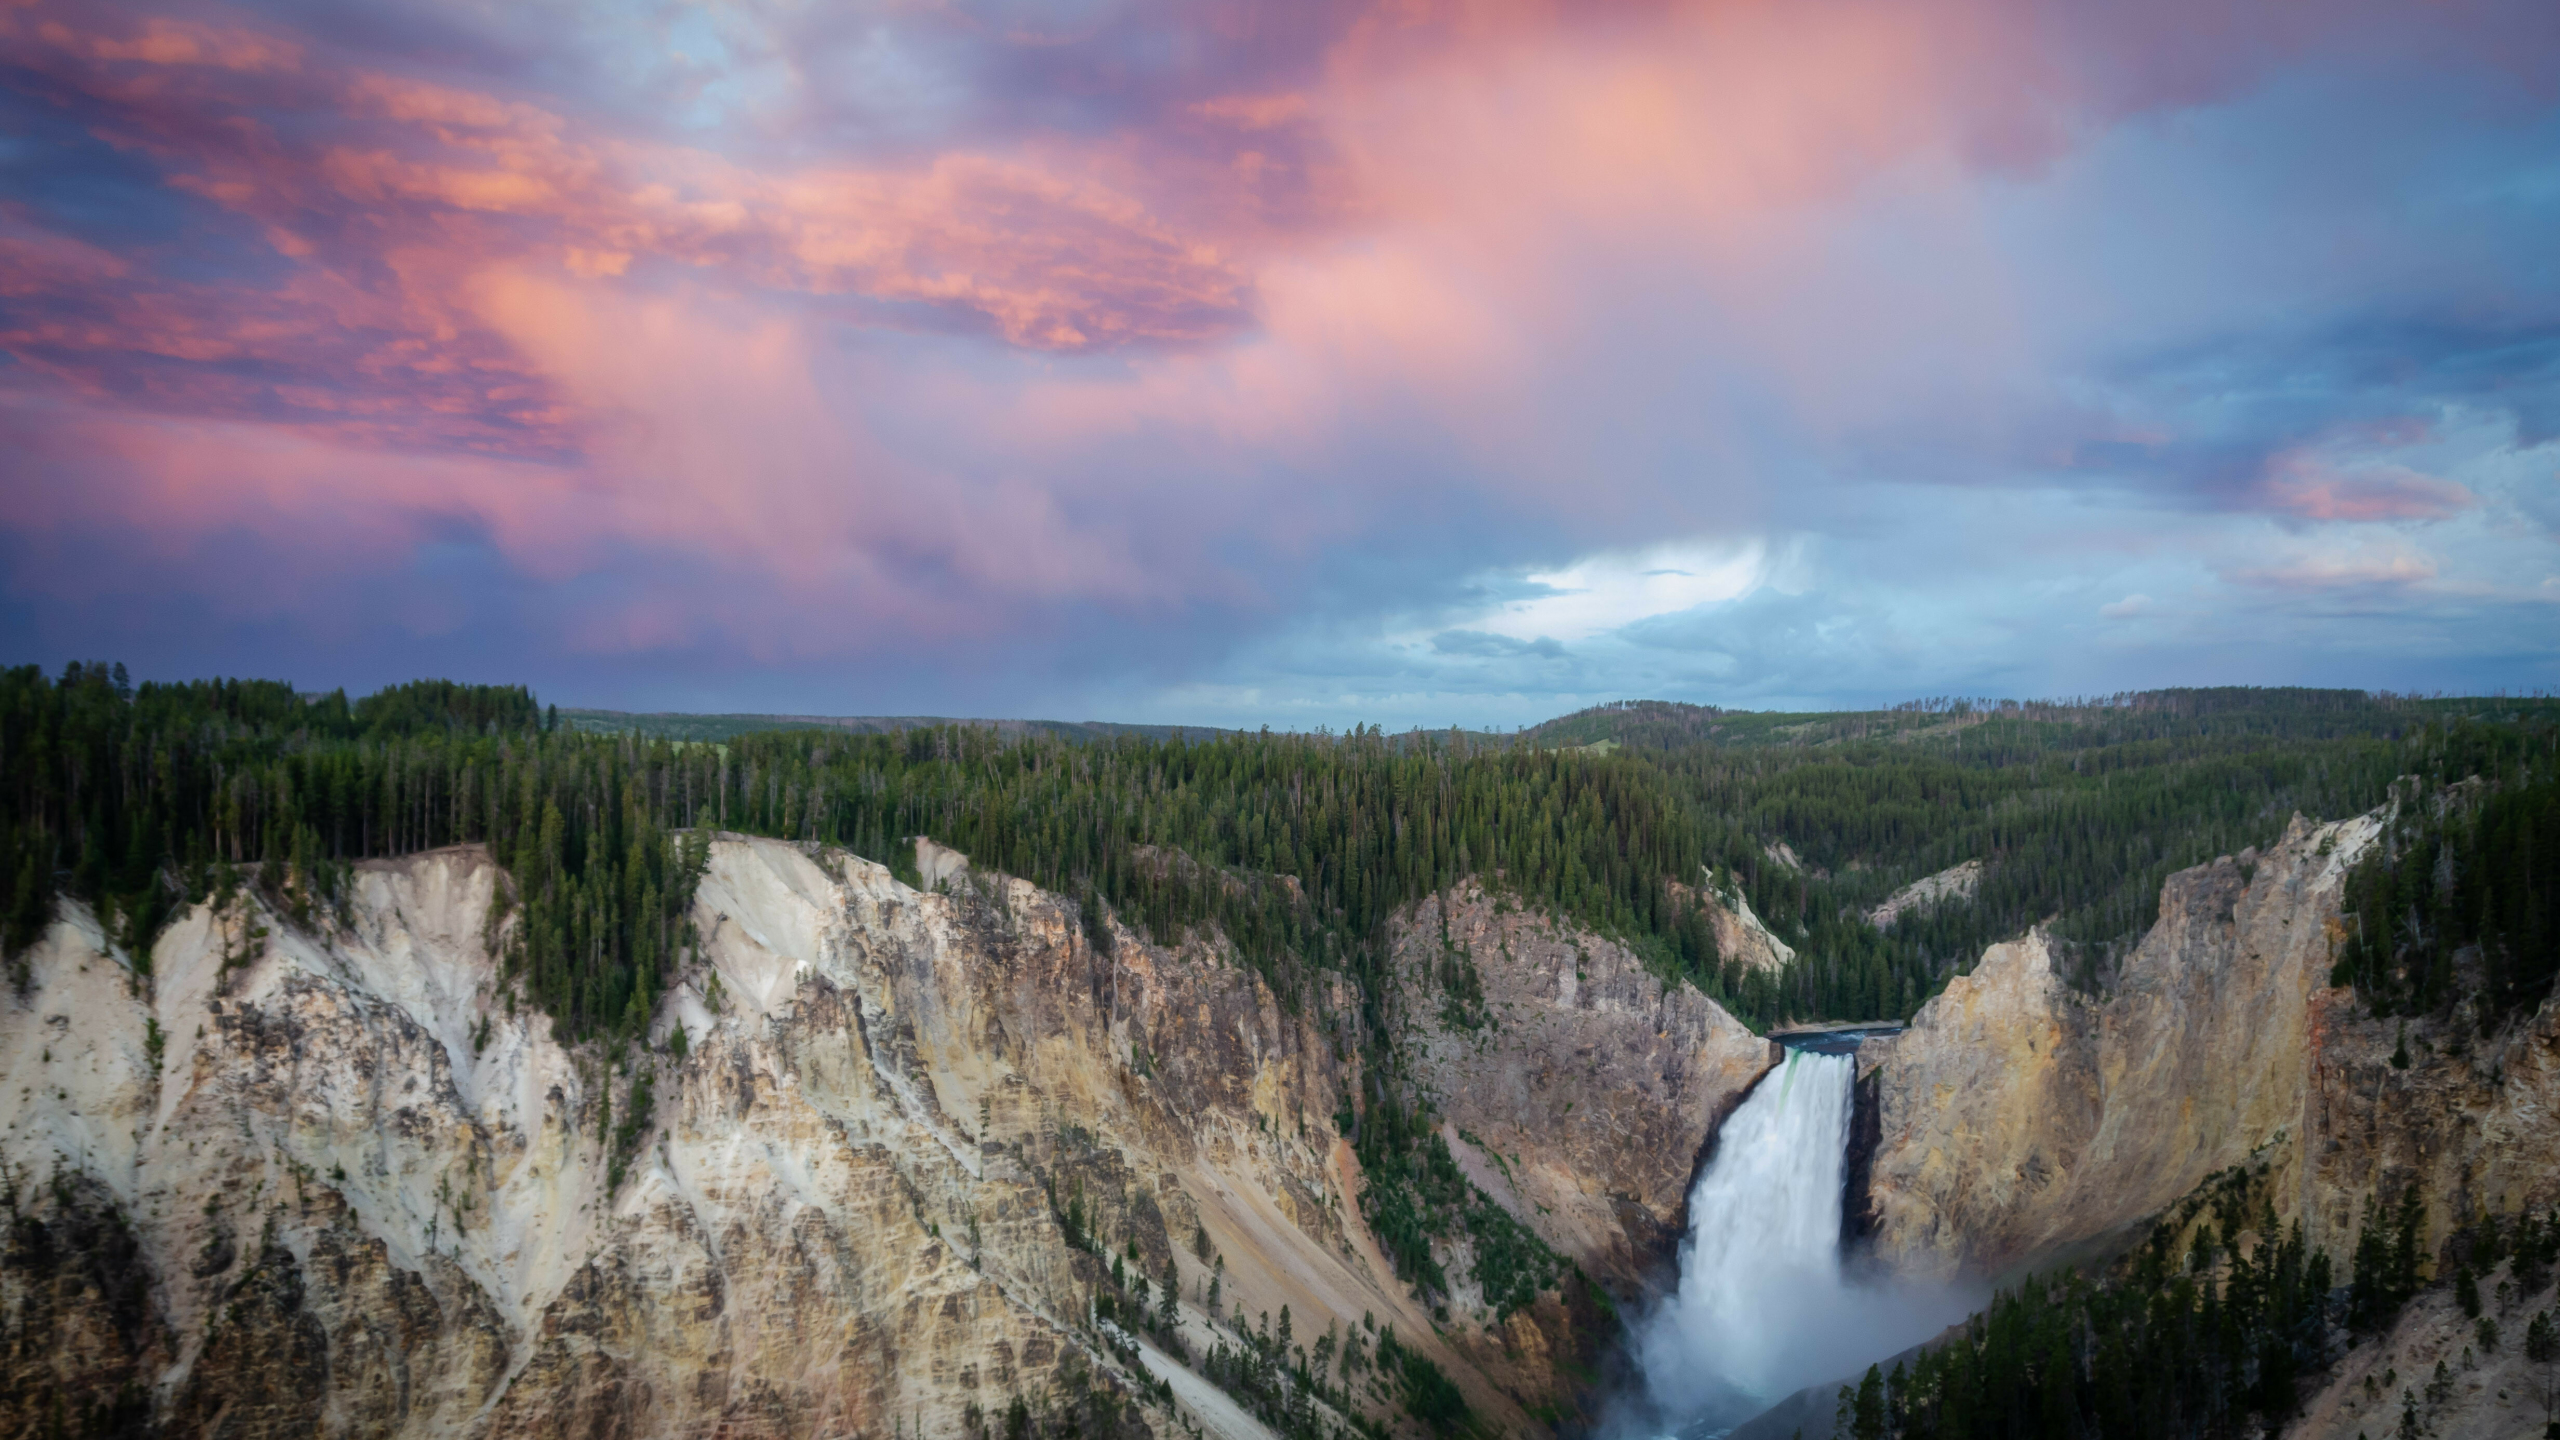 Download wallpaper 2560x1440 yellowstone national park, forest, sunset,  nature, dual wide 16:9 2560x1440 hd background, 28715